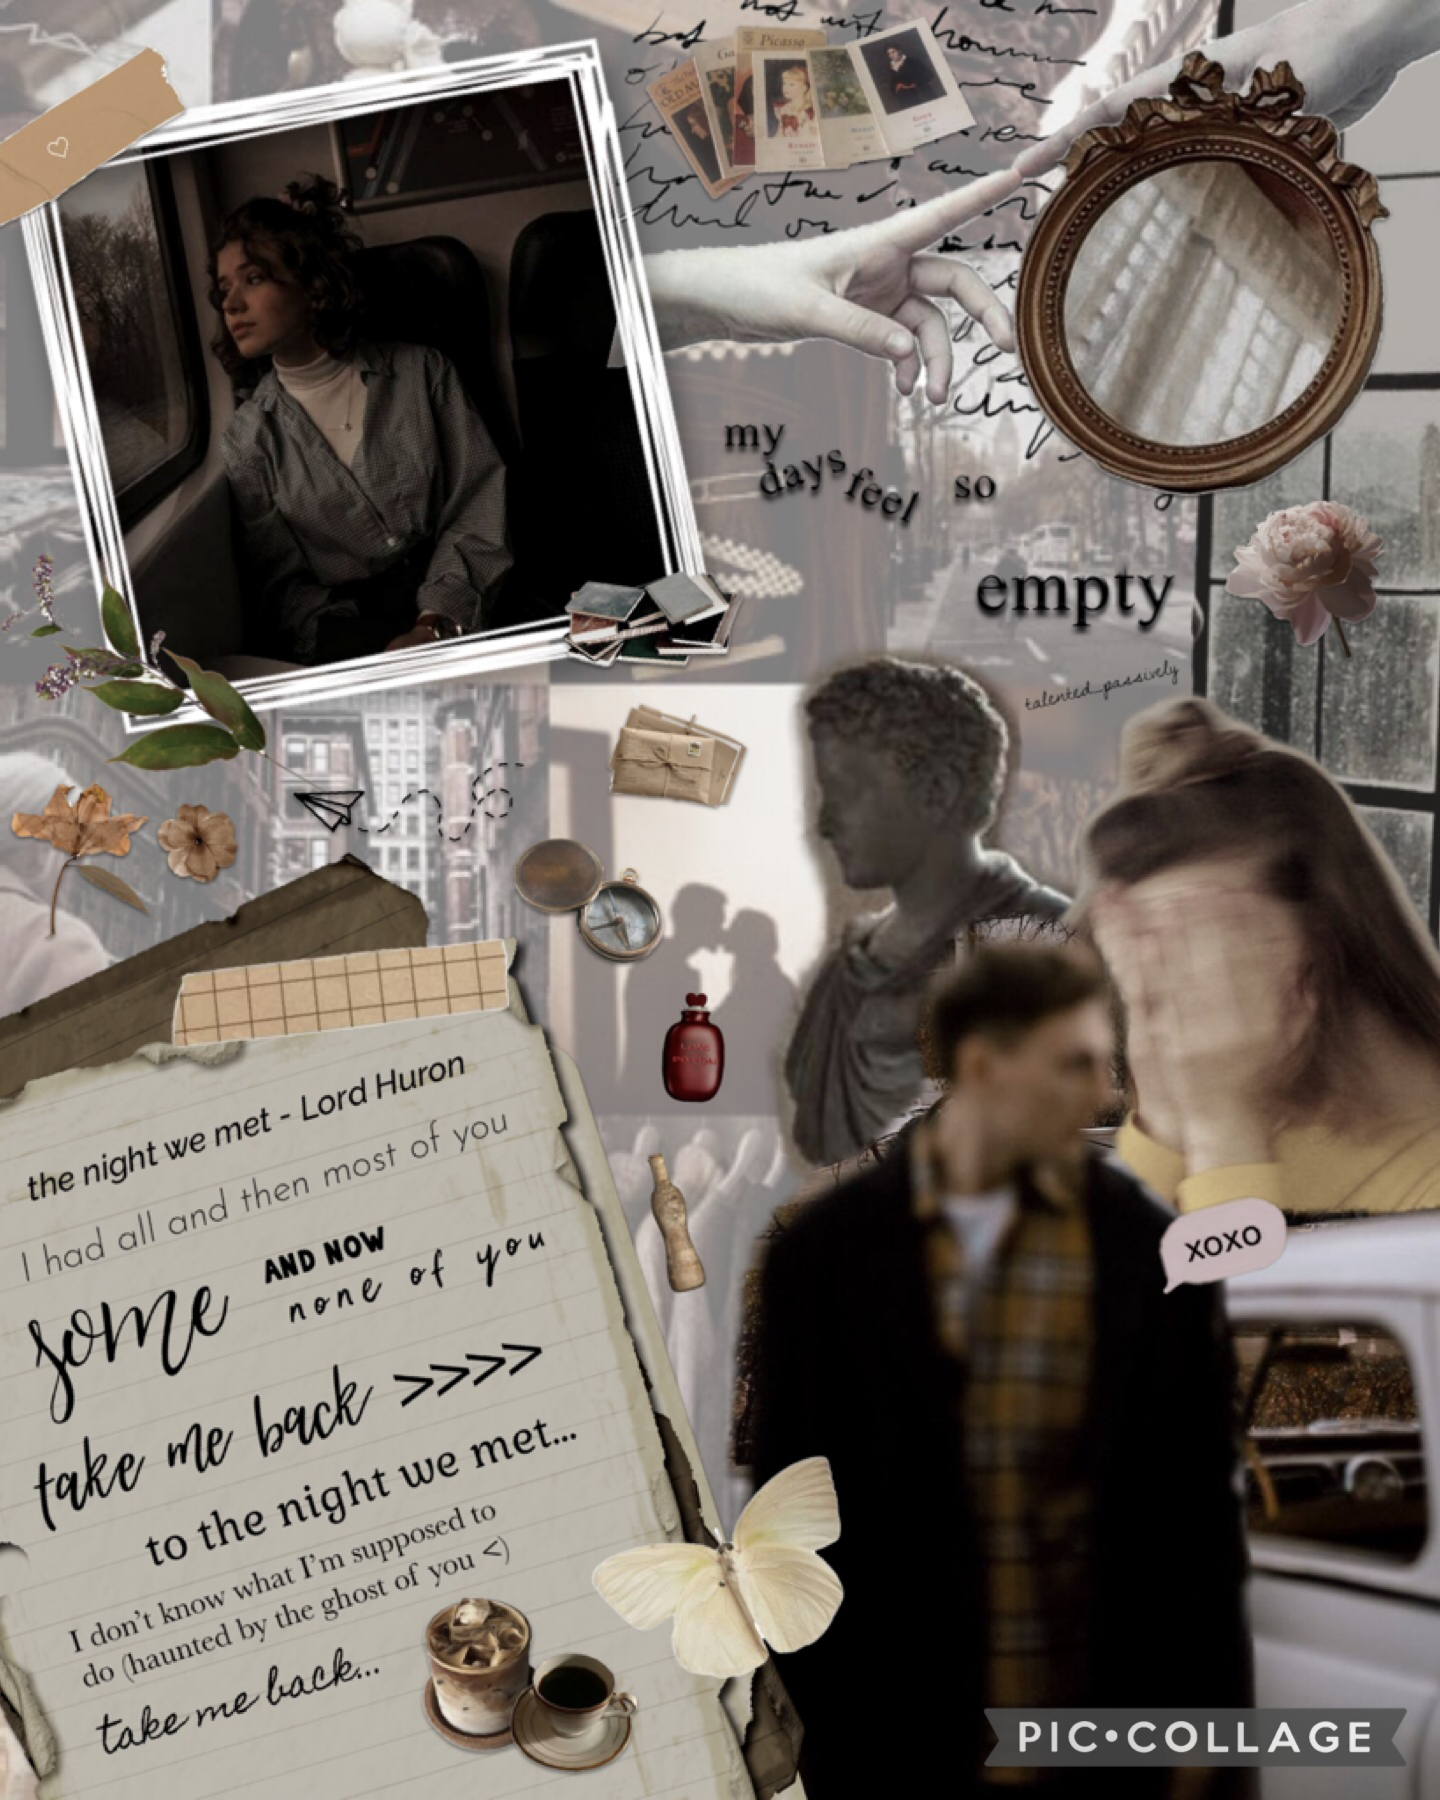 🗞️ 5/5/23 (tap here) 🗞️
she posted! let’s catch up. sorry i went on a random hiatus but i managed to make a collage! it’s hard to find inspo lately haha. qotd: the most exciting part of your week?